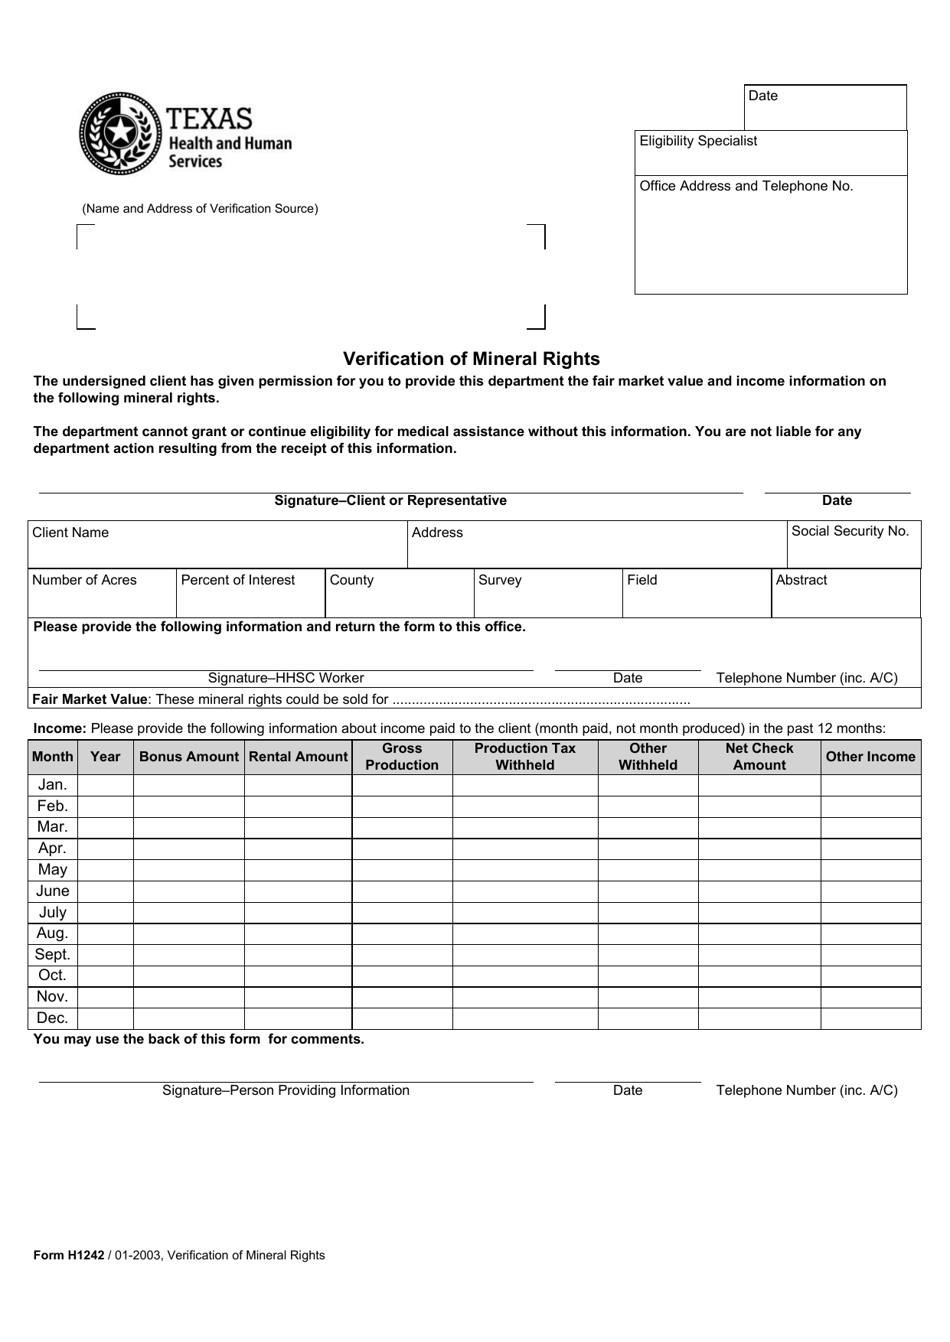 Form H1242 Verification of Mineral Rights - Texas, Page 1